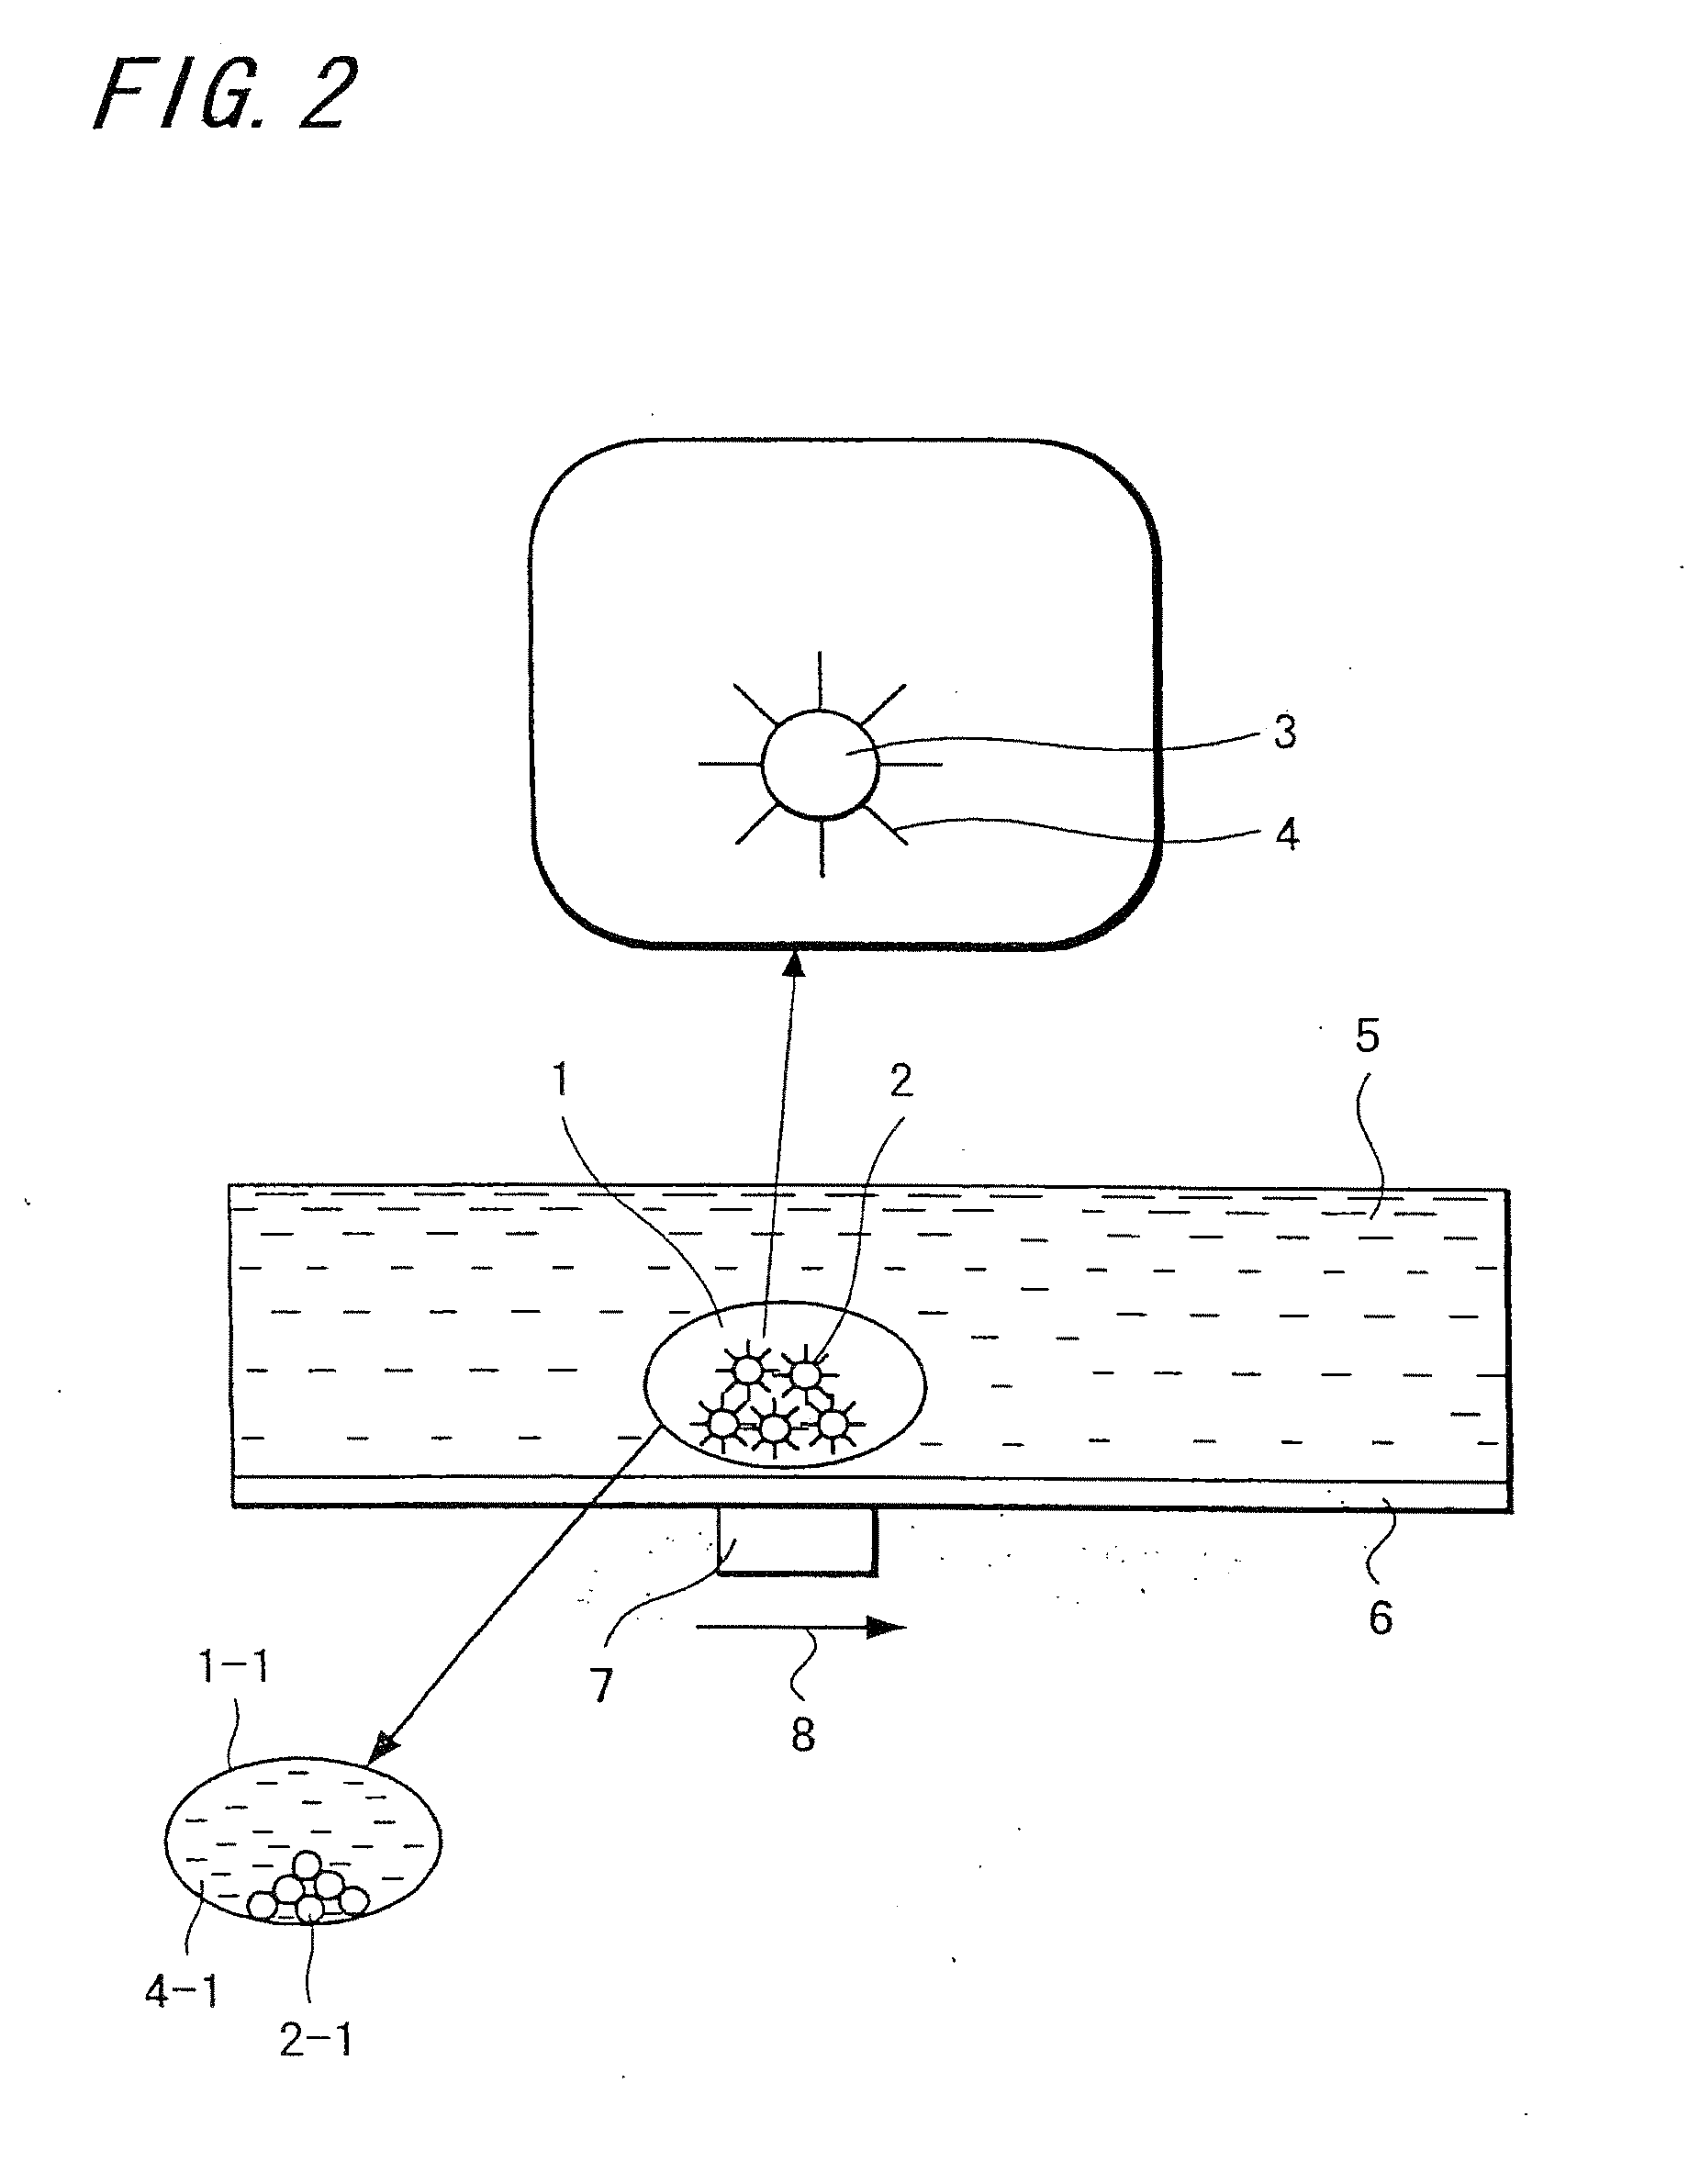 Chemical Analytic Apparatus and Chemical Analytic Method